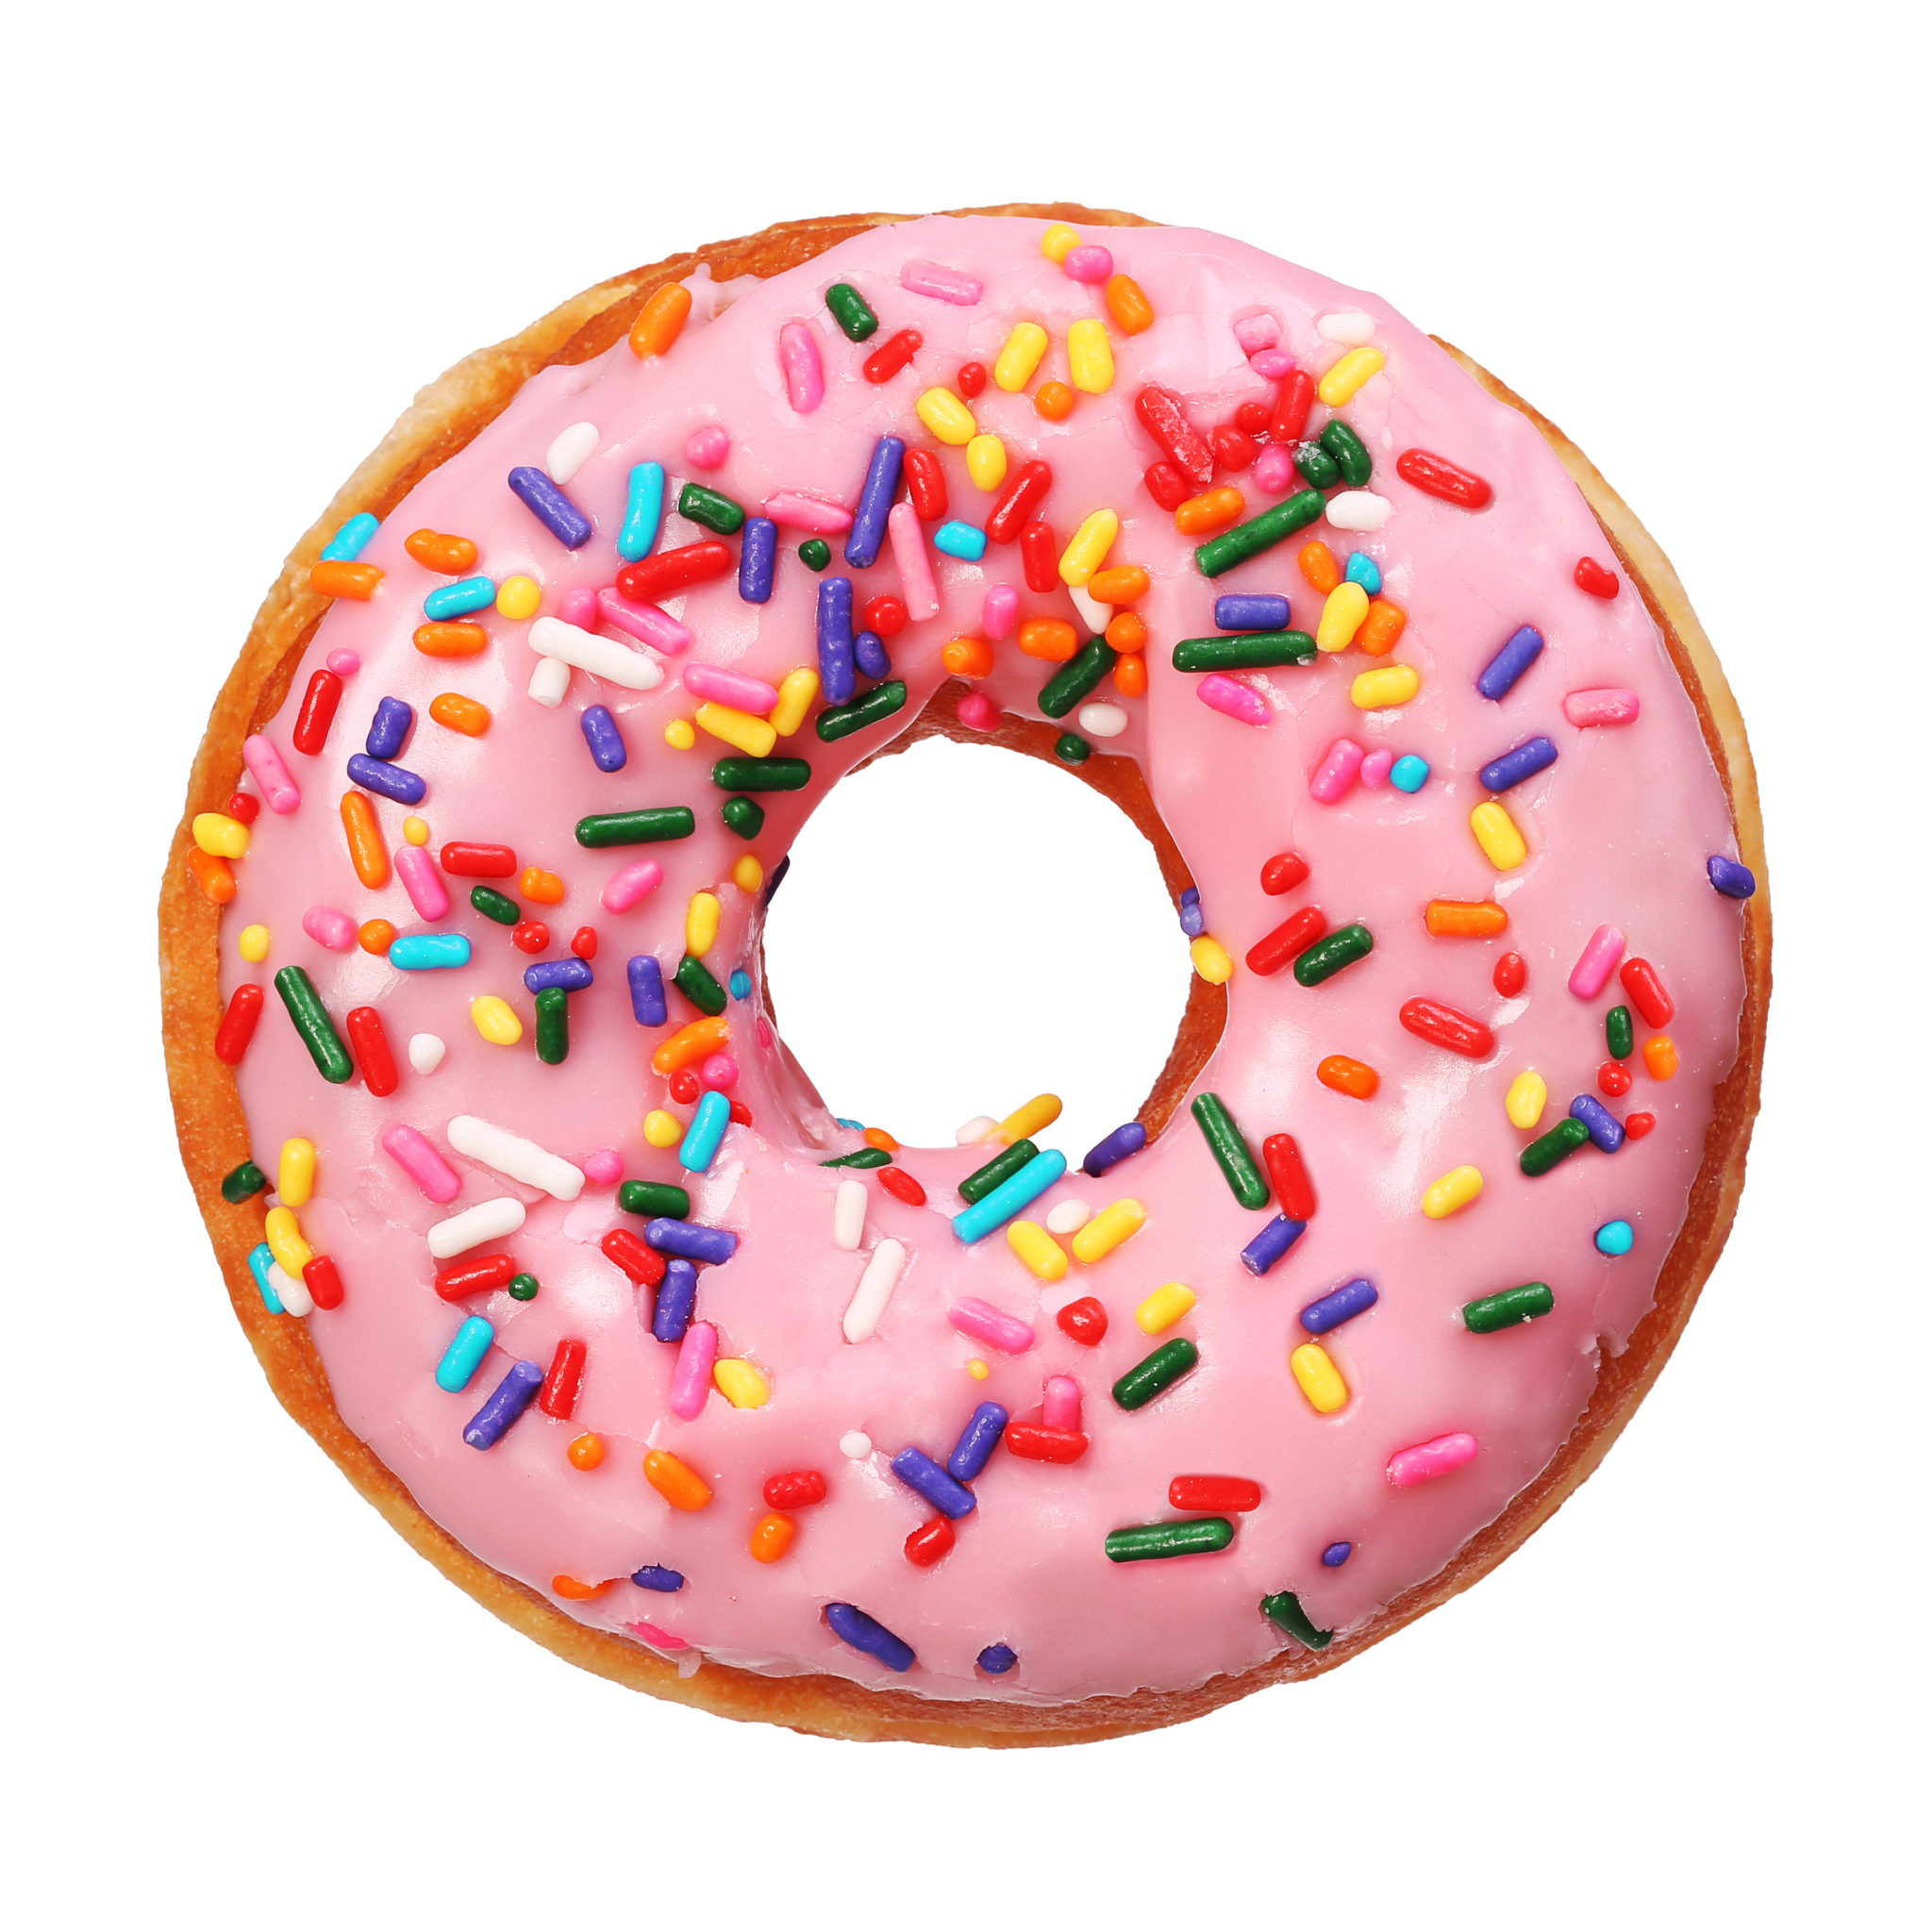 A pink frosted doughnut on a white background